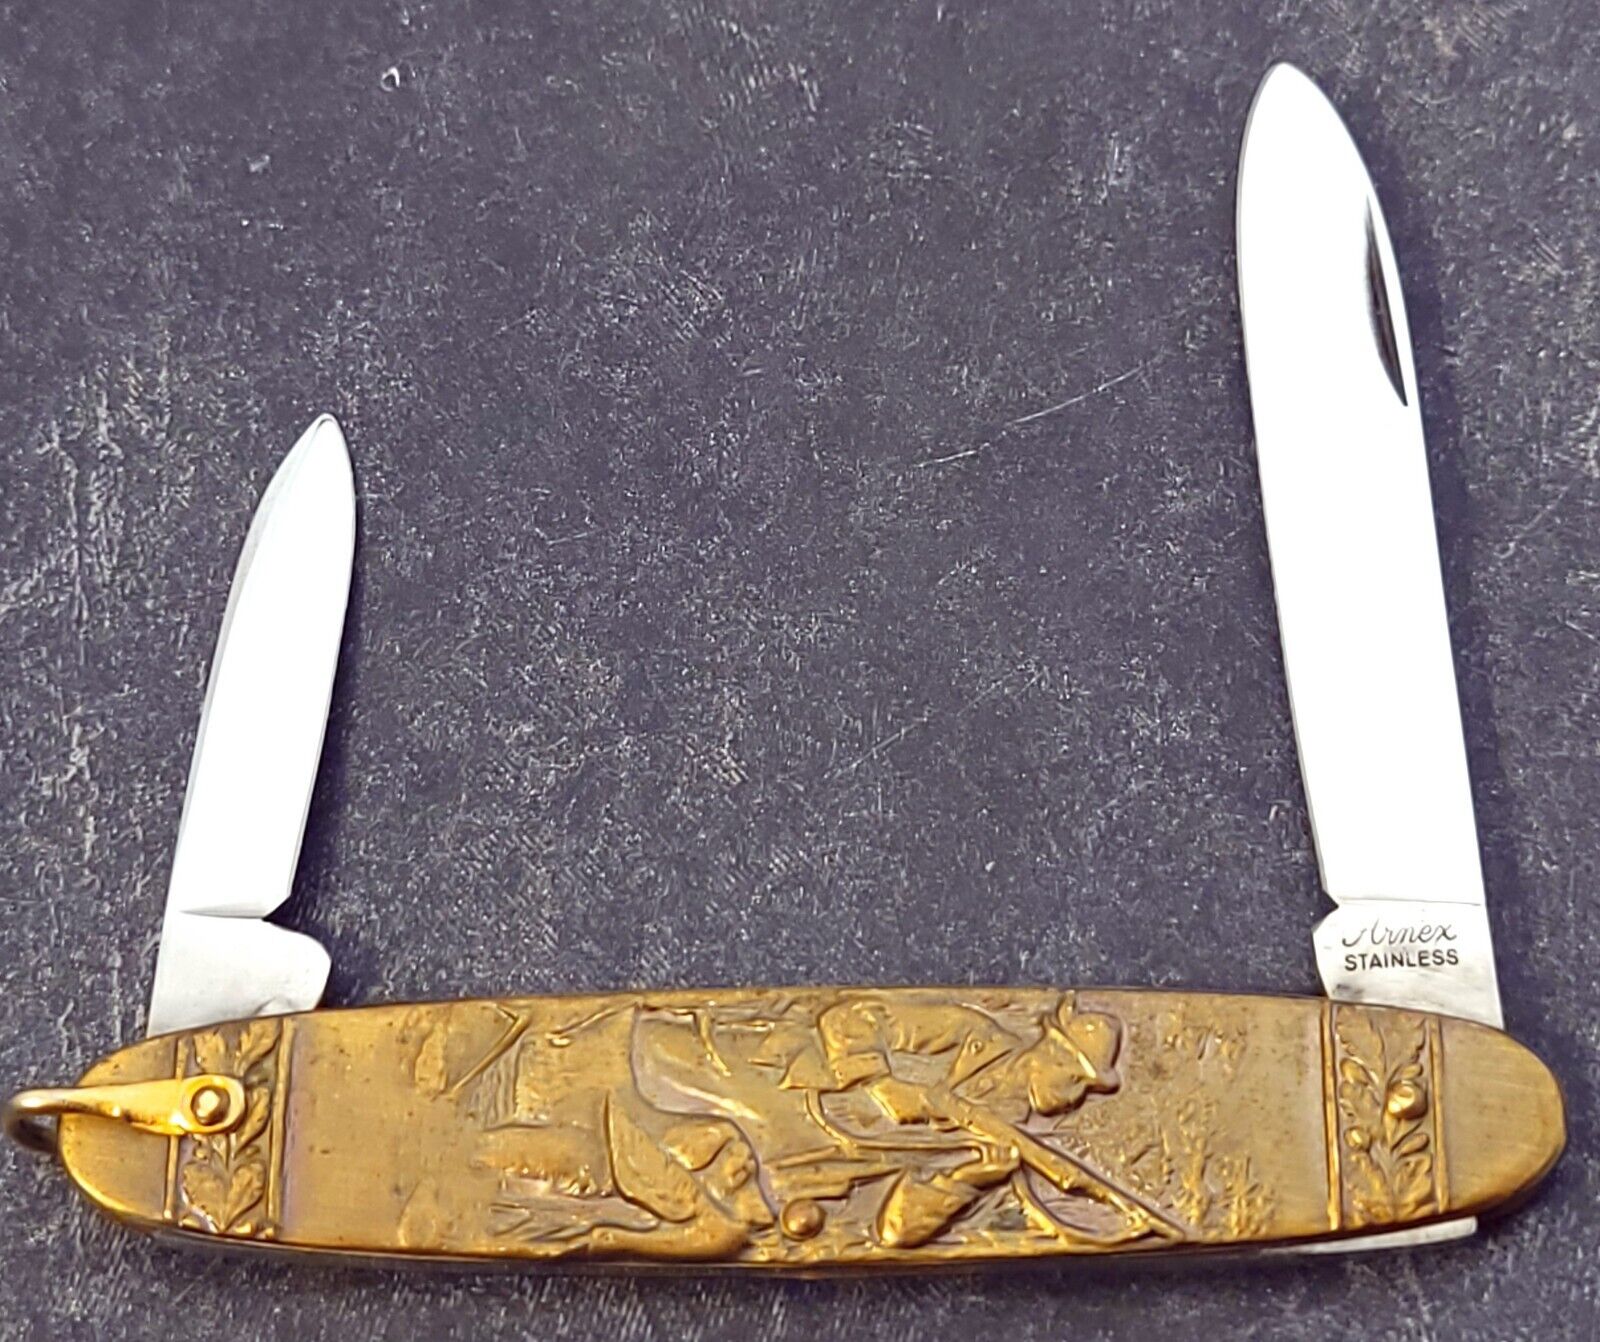 ARNEX Knife Made In Solingen Germany 2 Blade BRASS Handles W/Gold Chain